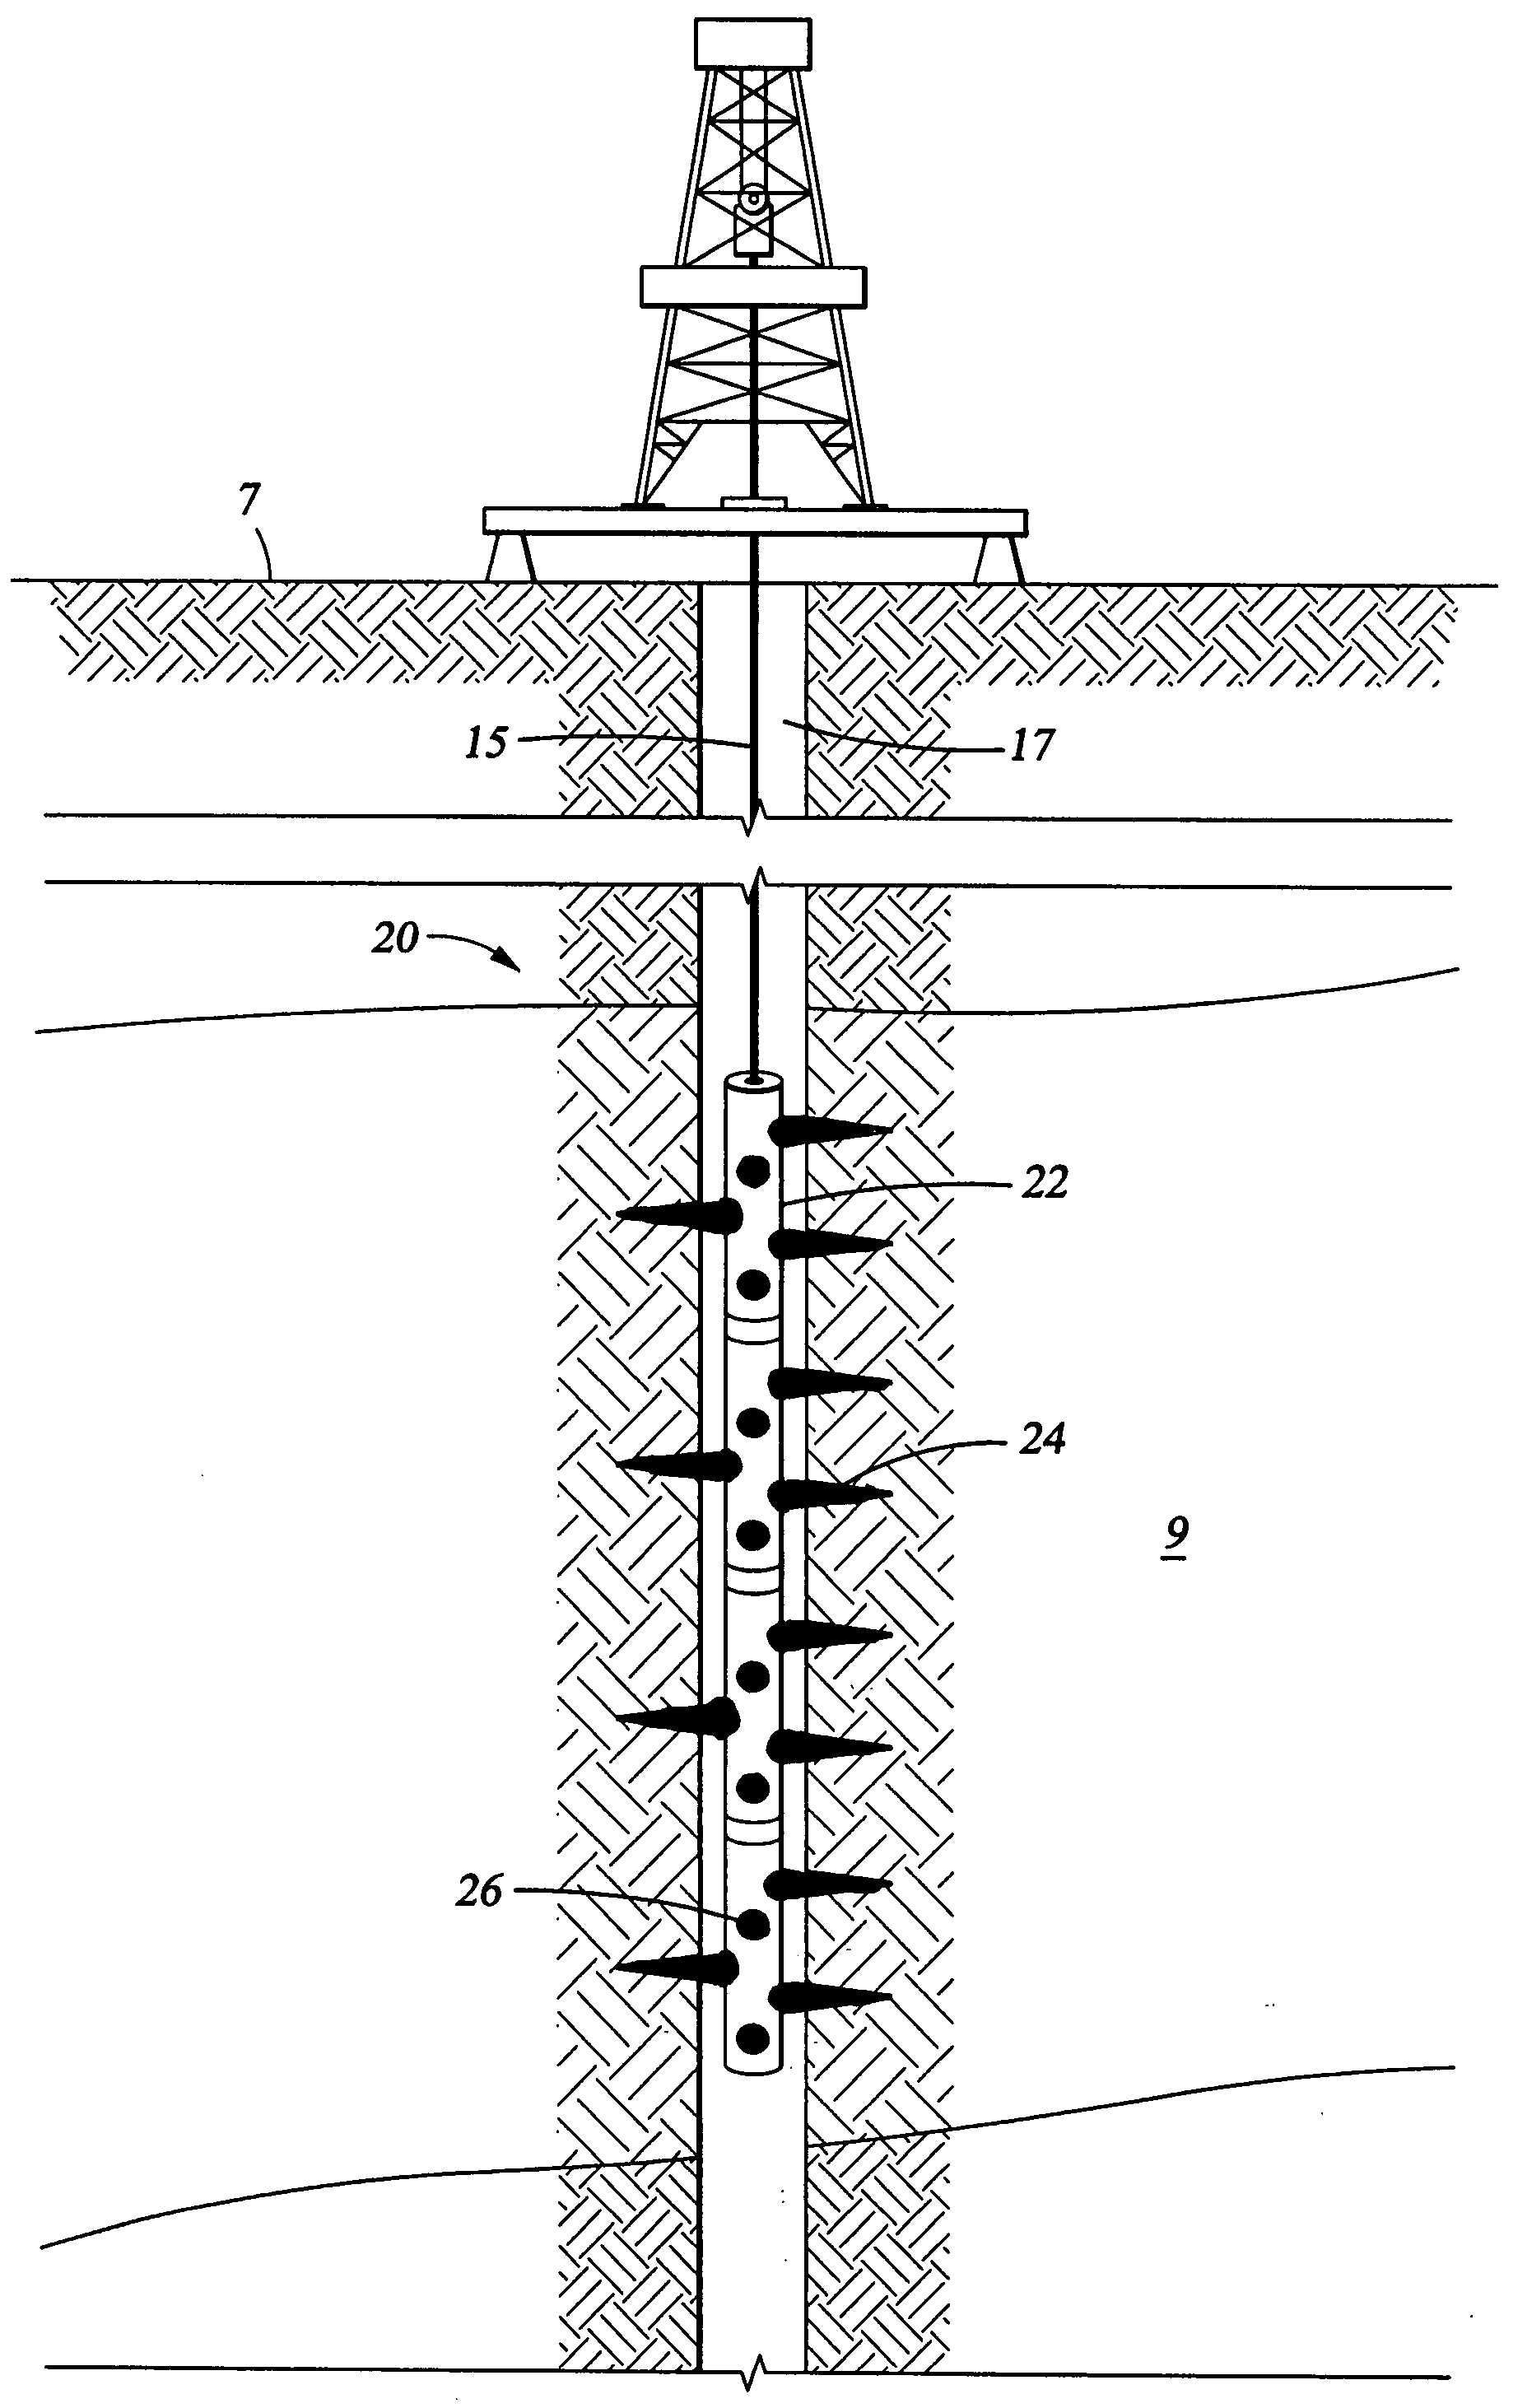 Perforating system comprising an energetic material